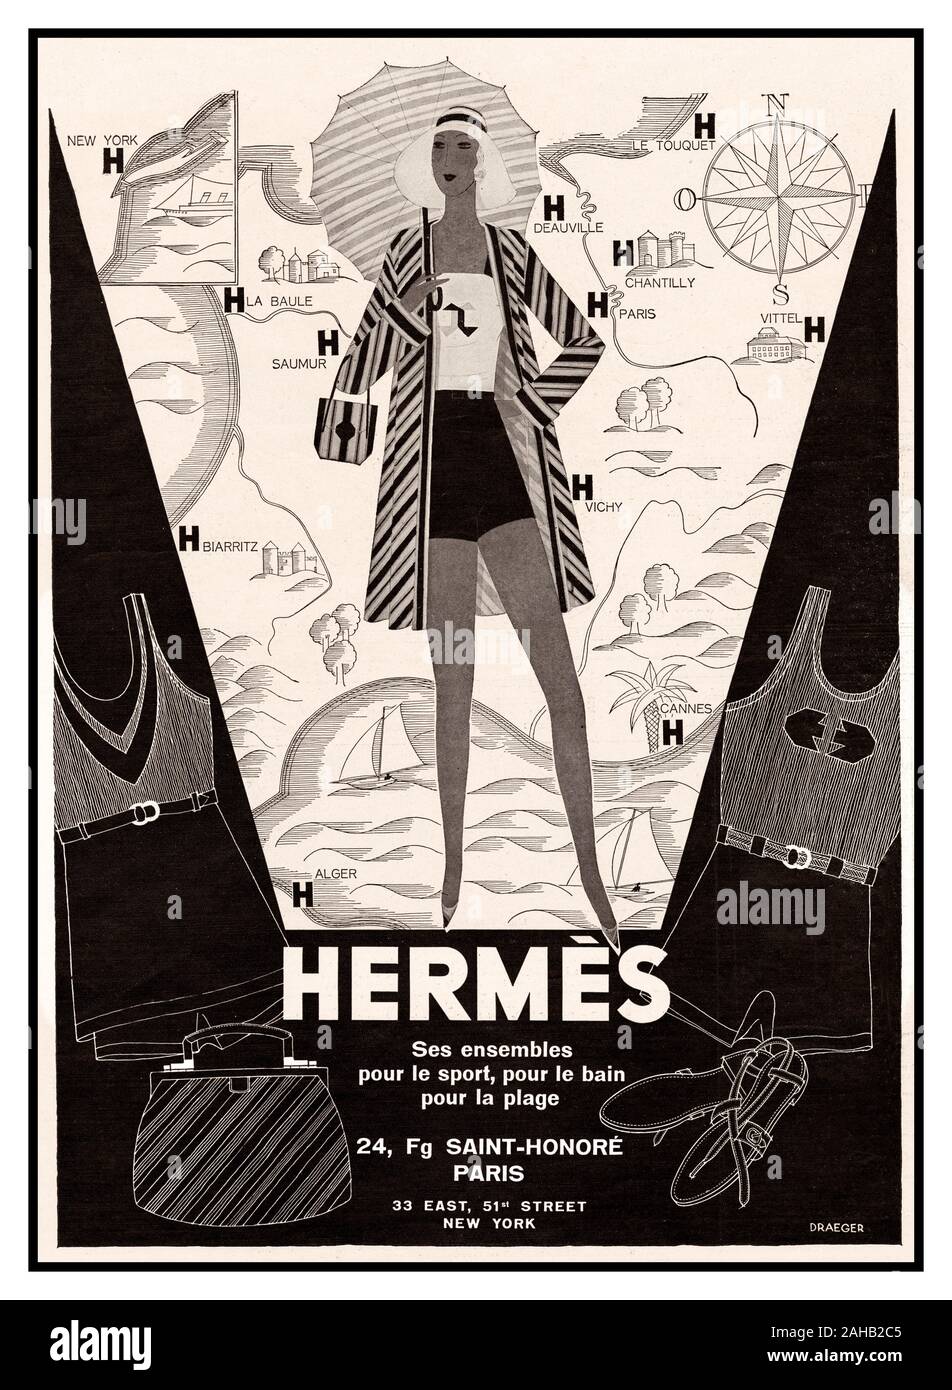 HERMÈS Vintage 1930’s page Illustration french advertisement for Hermès luxury sportswear clothing superimposed on a map of suitable vacation spots - all locations with Hermès shops (indicated by a bold letter "H"). France L'Illustration Magazine Publication, June 7, 1930 Paris & New York Stock Photo